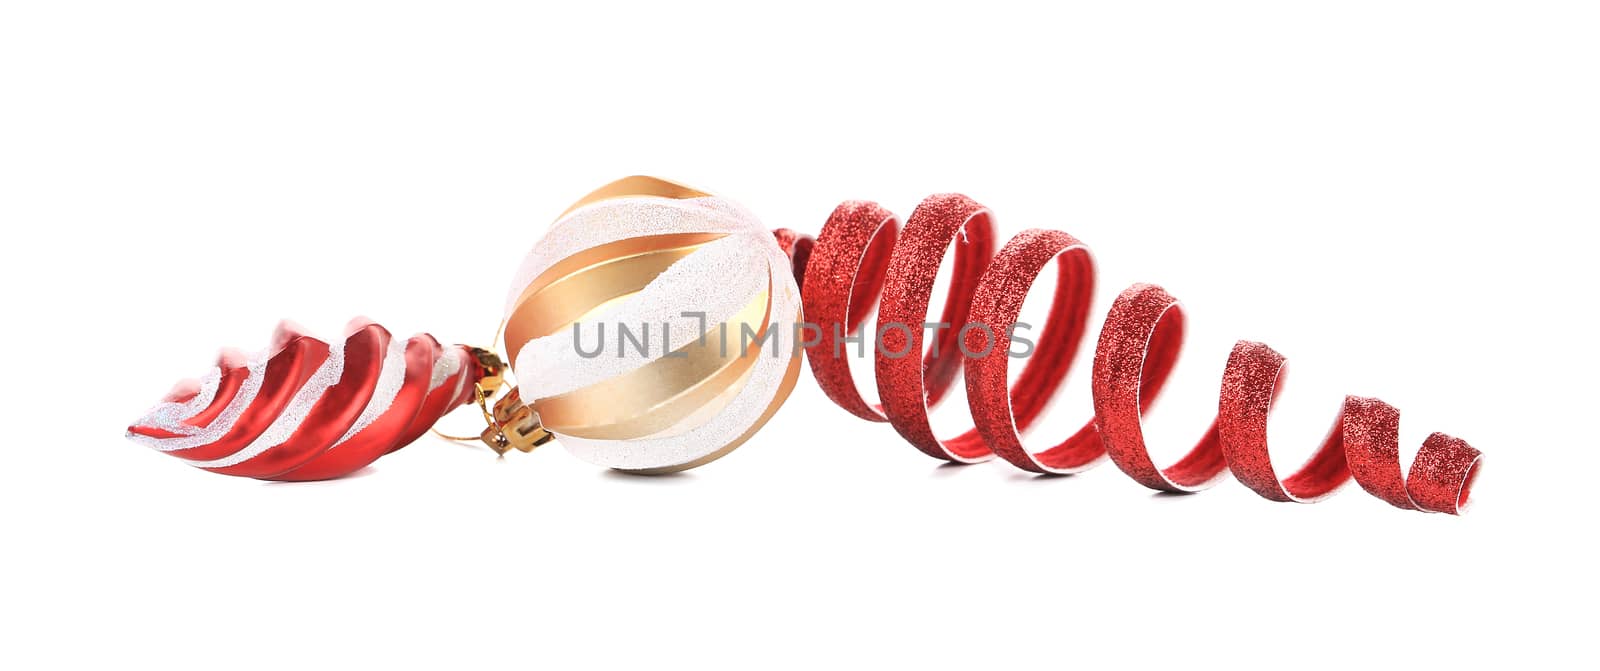 Christmas decoration toys. Isolated on a white background.